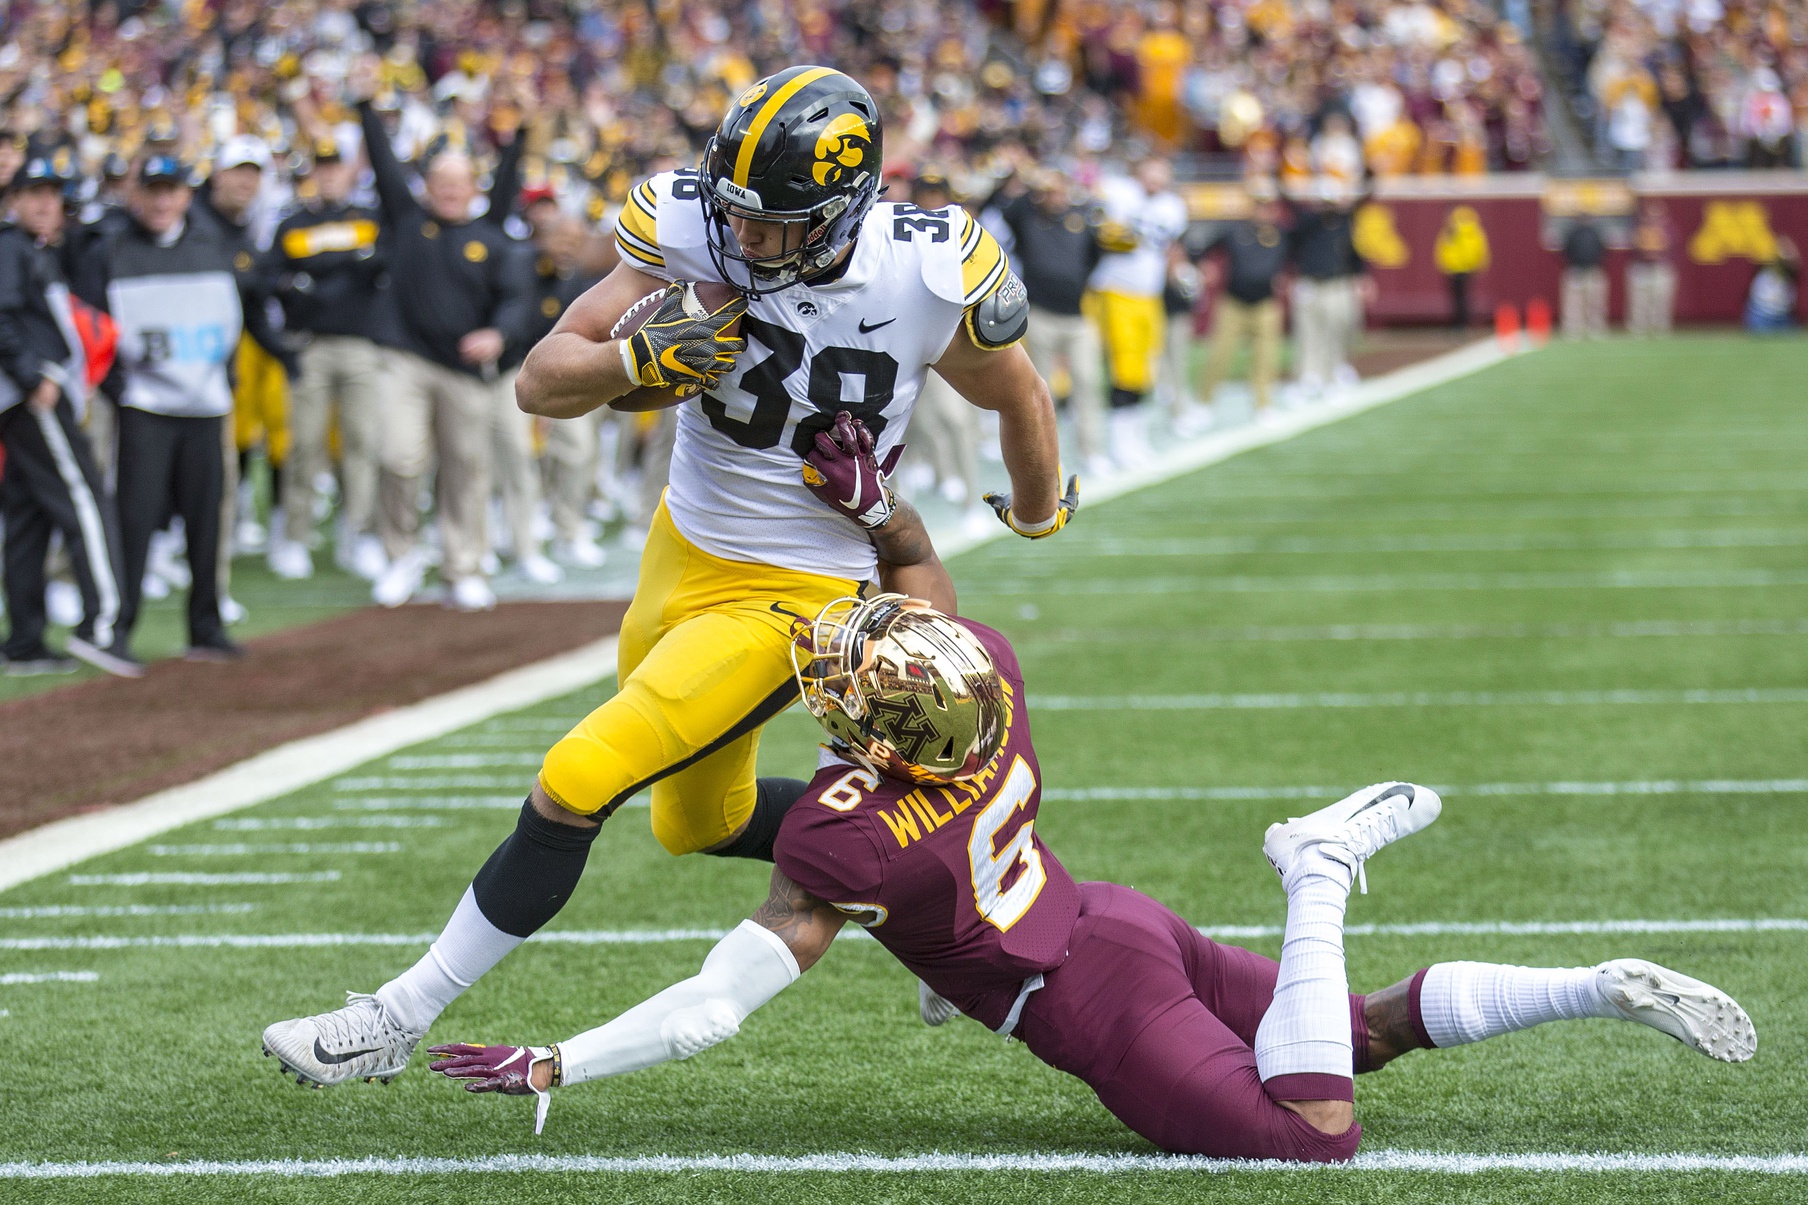 WATCH: Iowa lines up for FG, pulls off crazy trick-play TD1808 x 1205